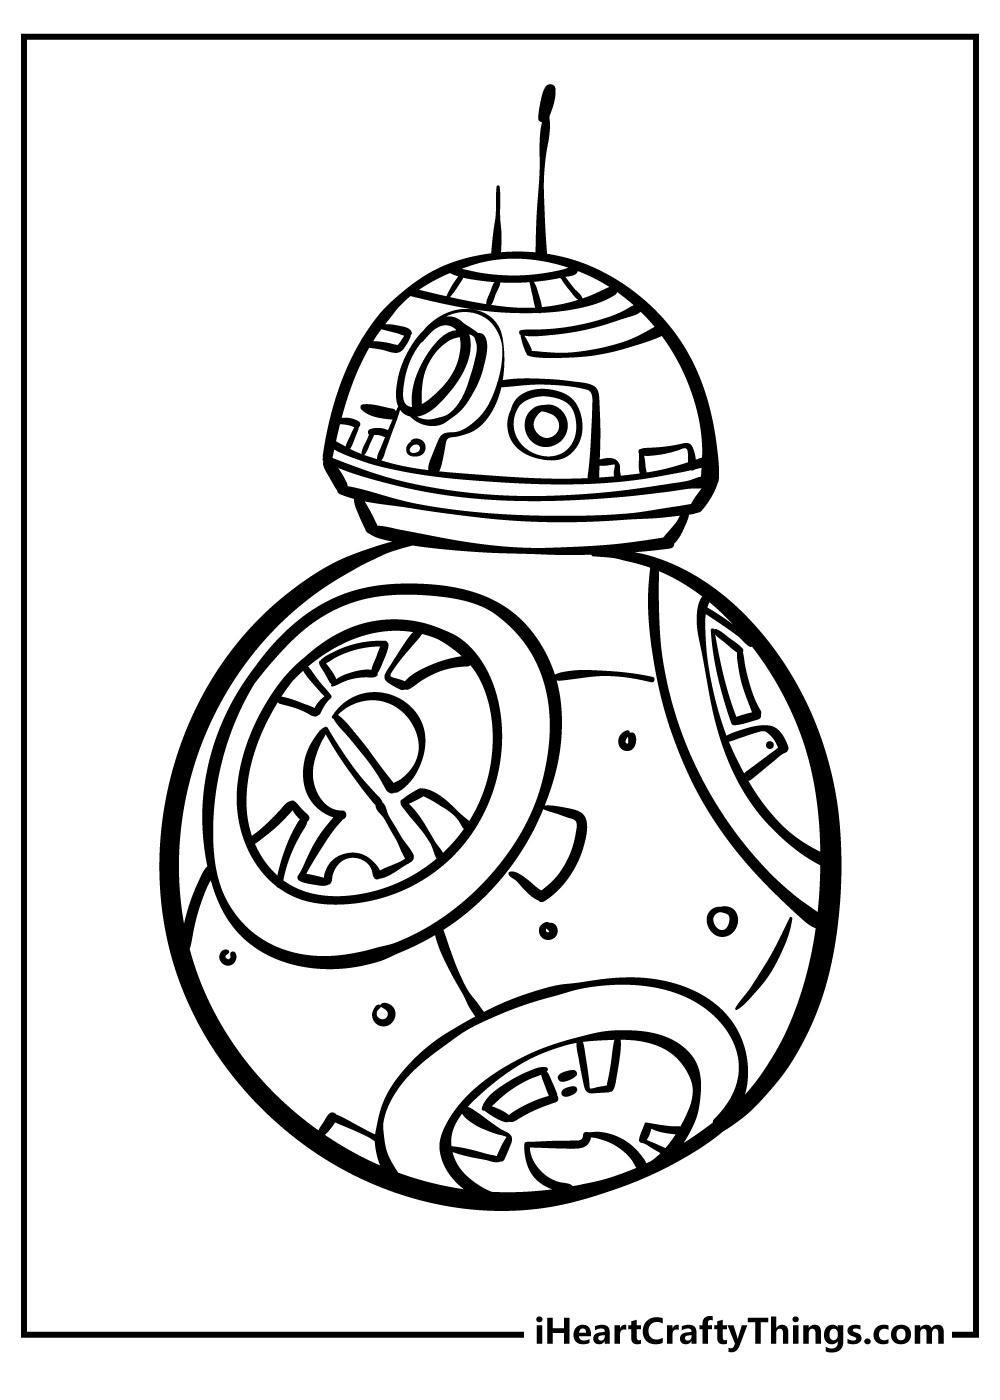 Printable Star Wars Coloring Pages (Updated 2022)